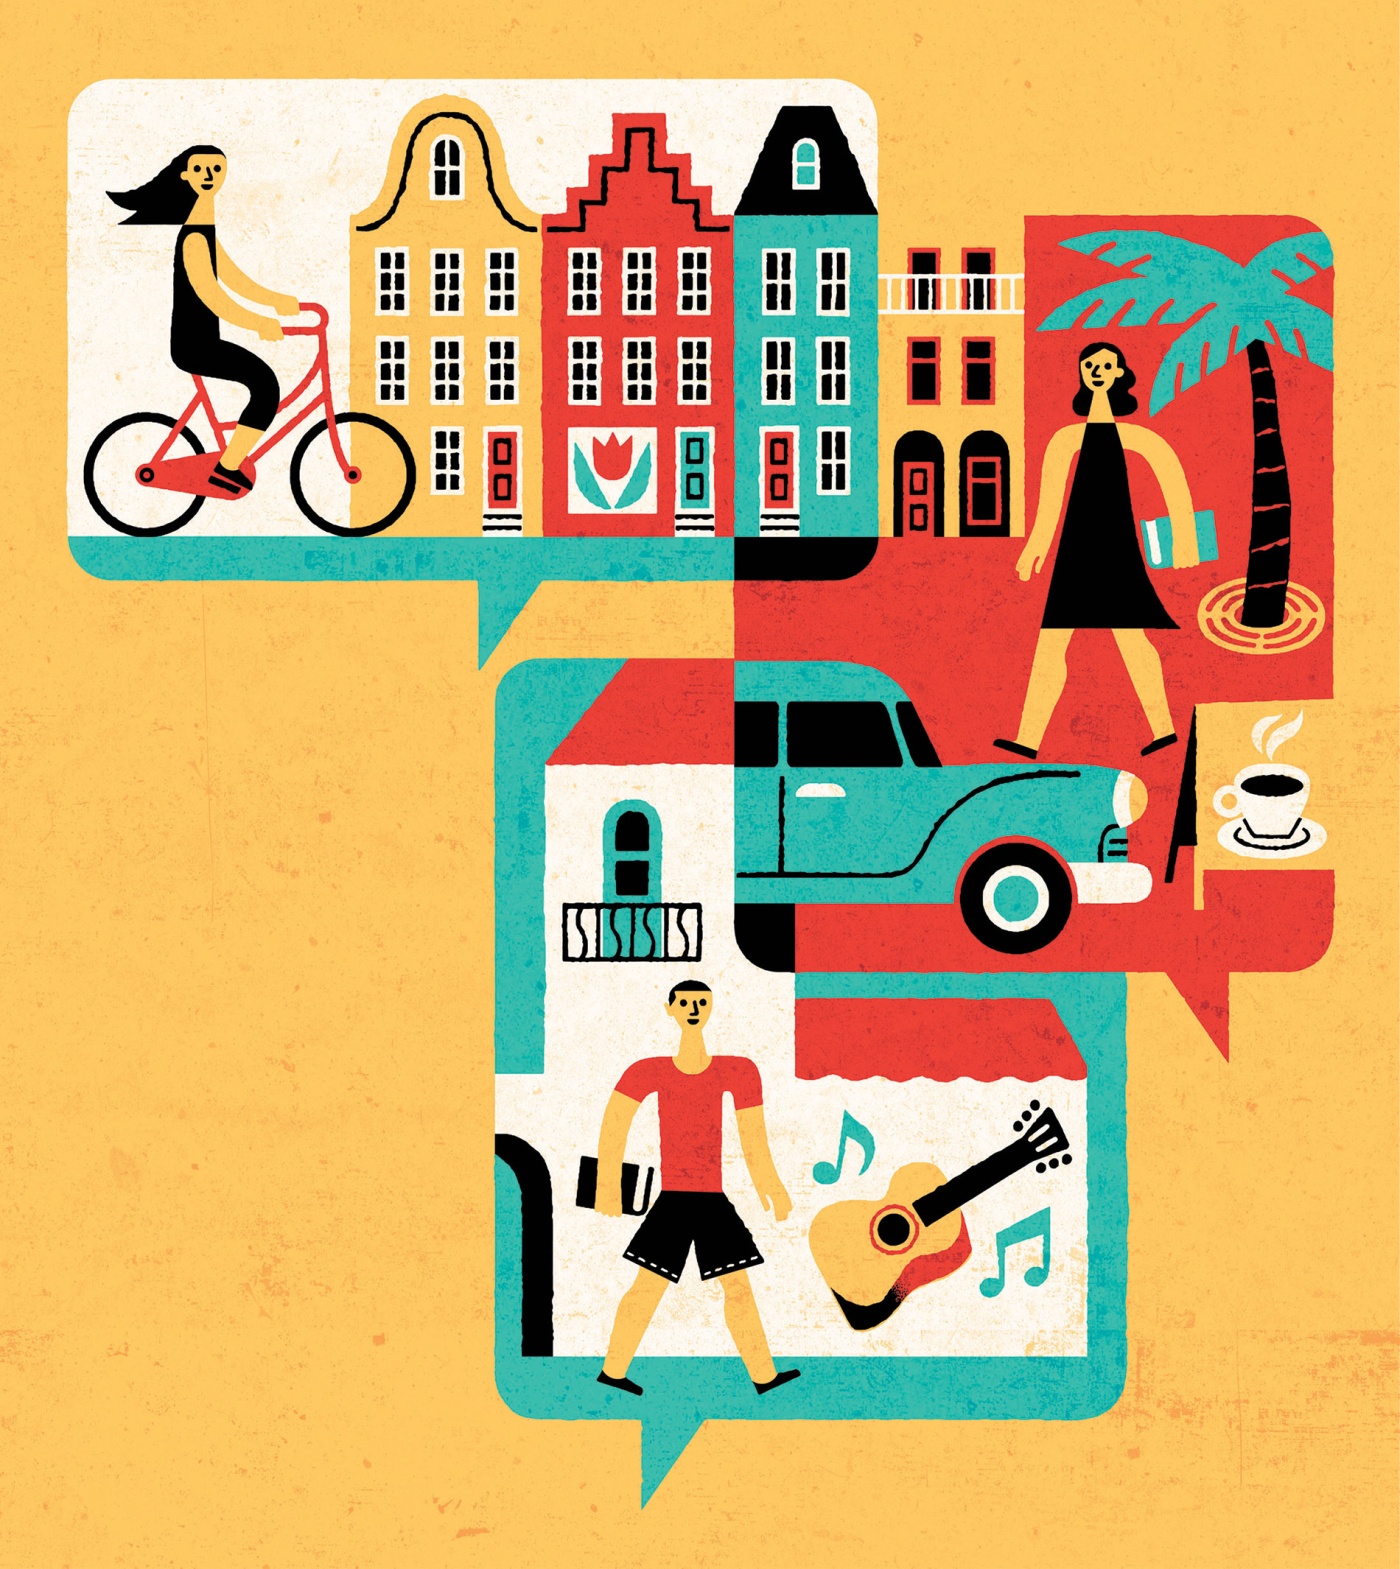 Illustration by Tim Cook of individuals studying abroad